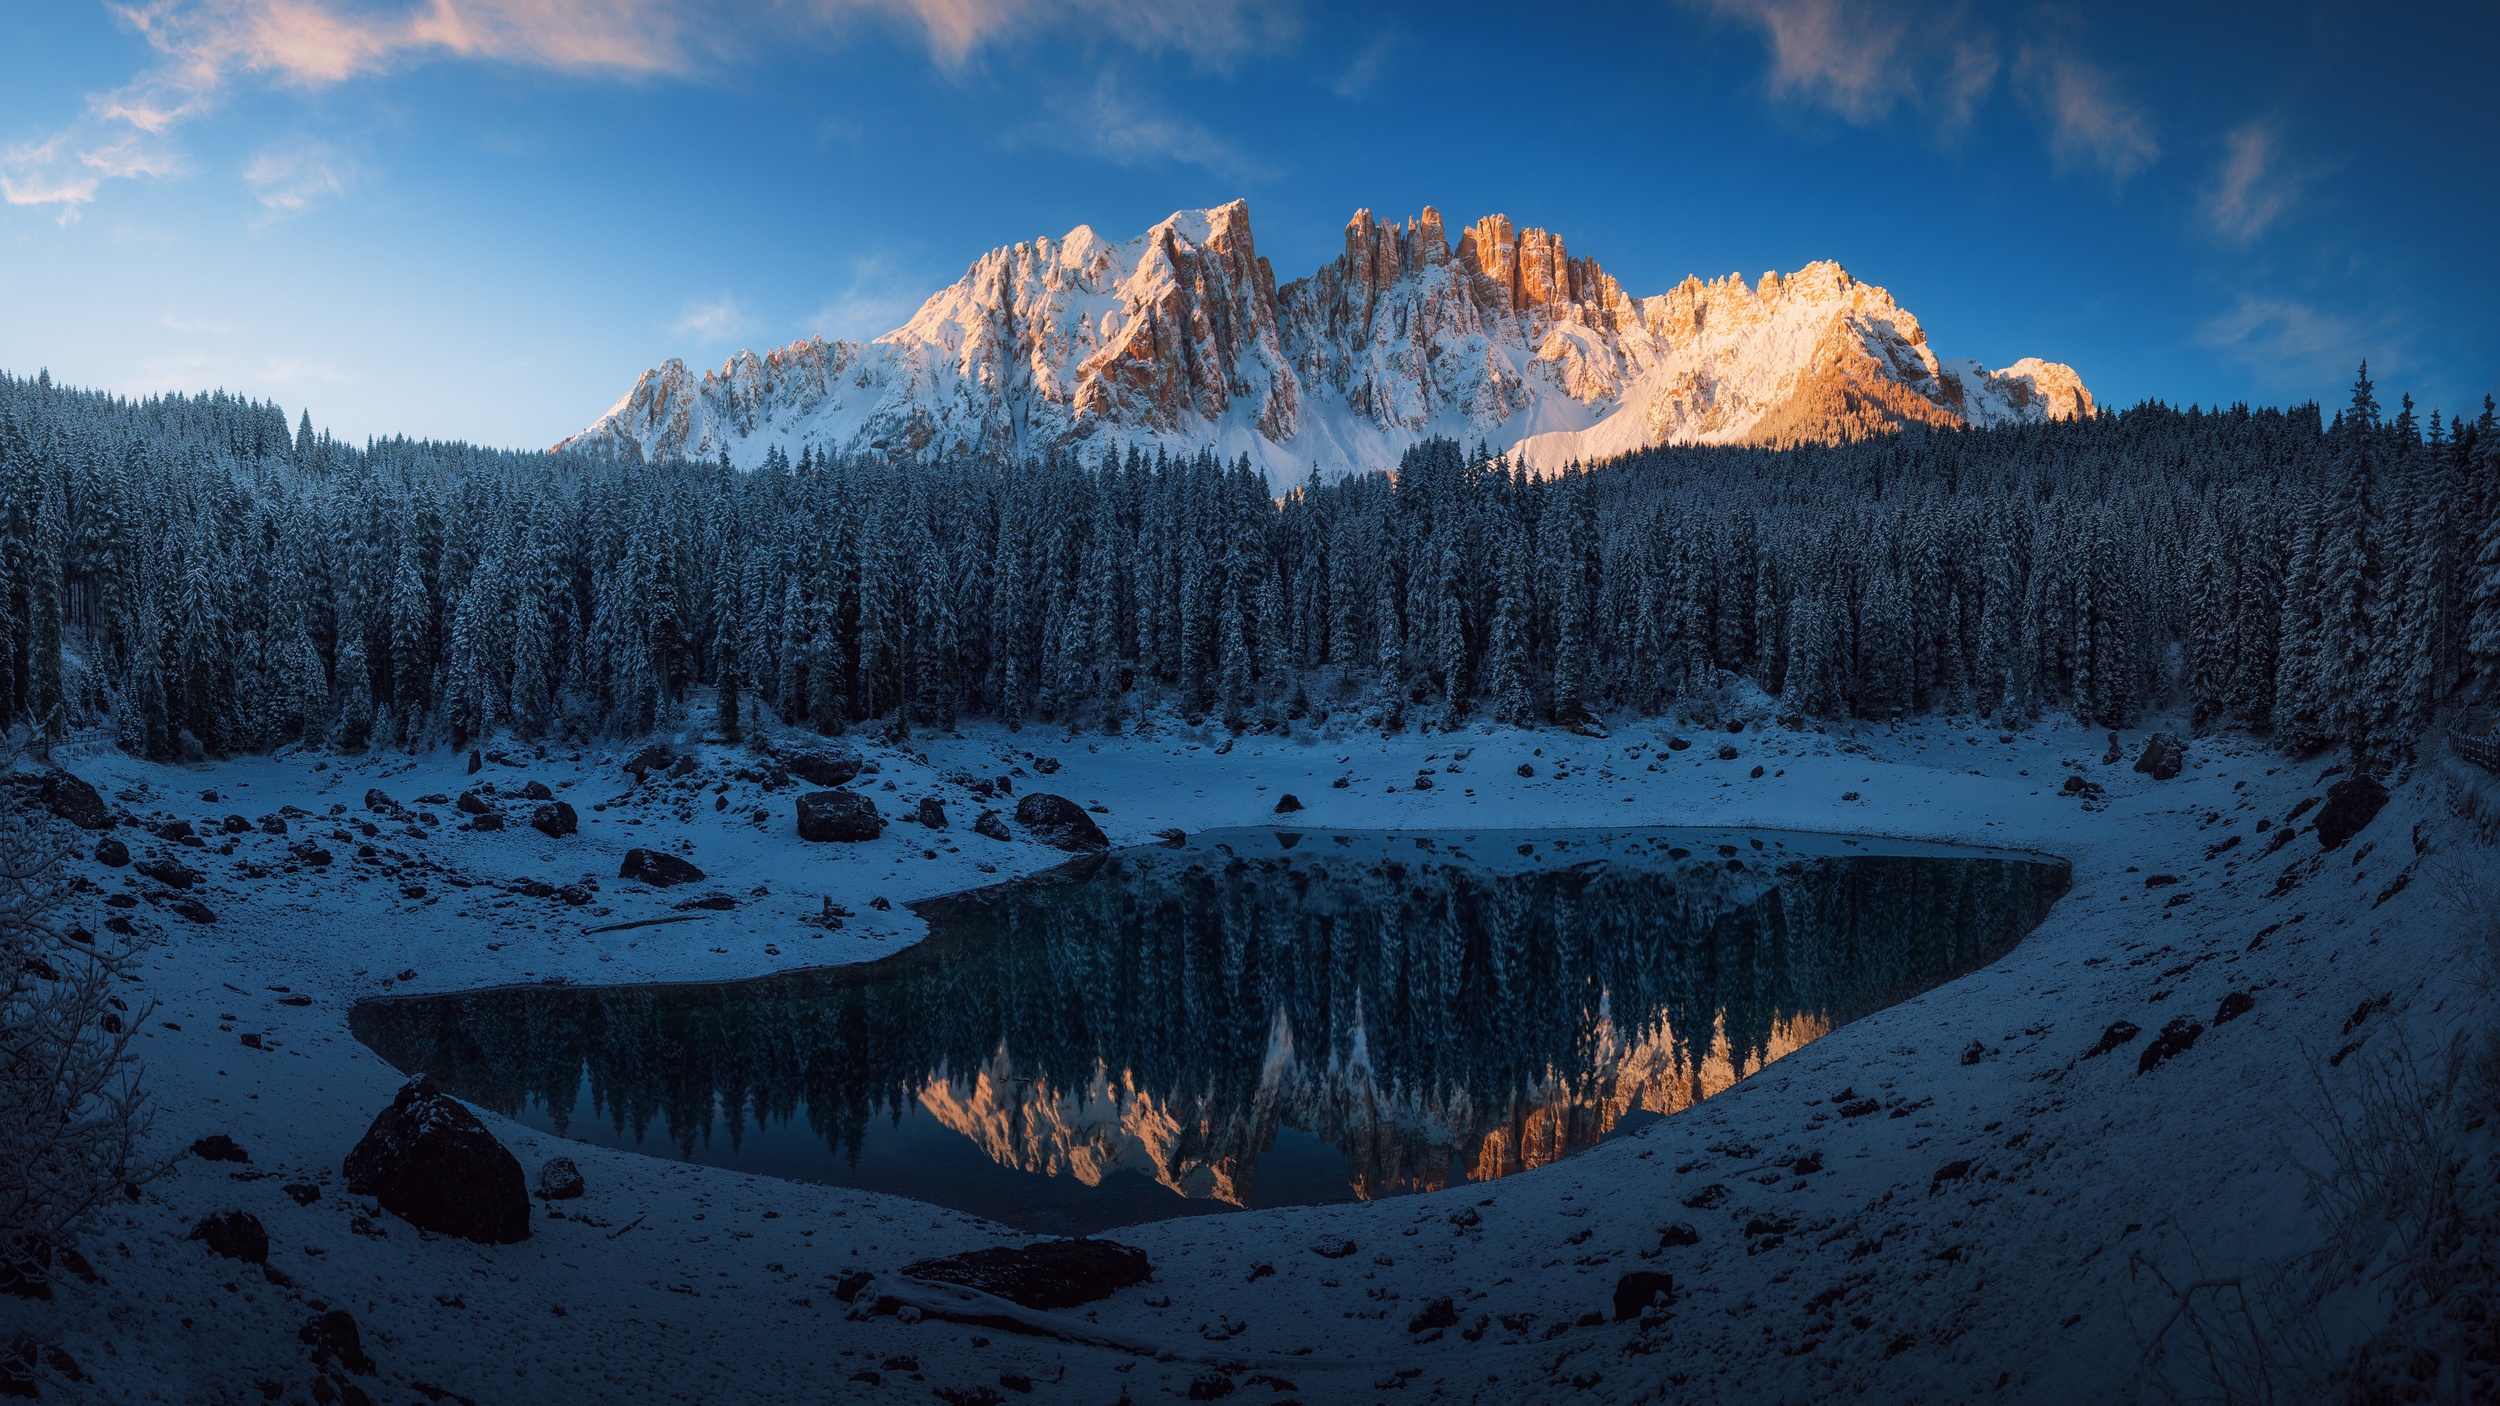 General 2500x1406 mountains nature landscape trees Dolomites reflection pond winter snowy peak snowy mountain cold ice snow outdoors